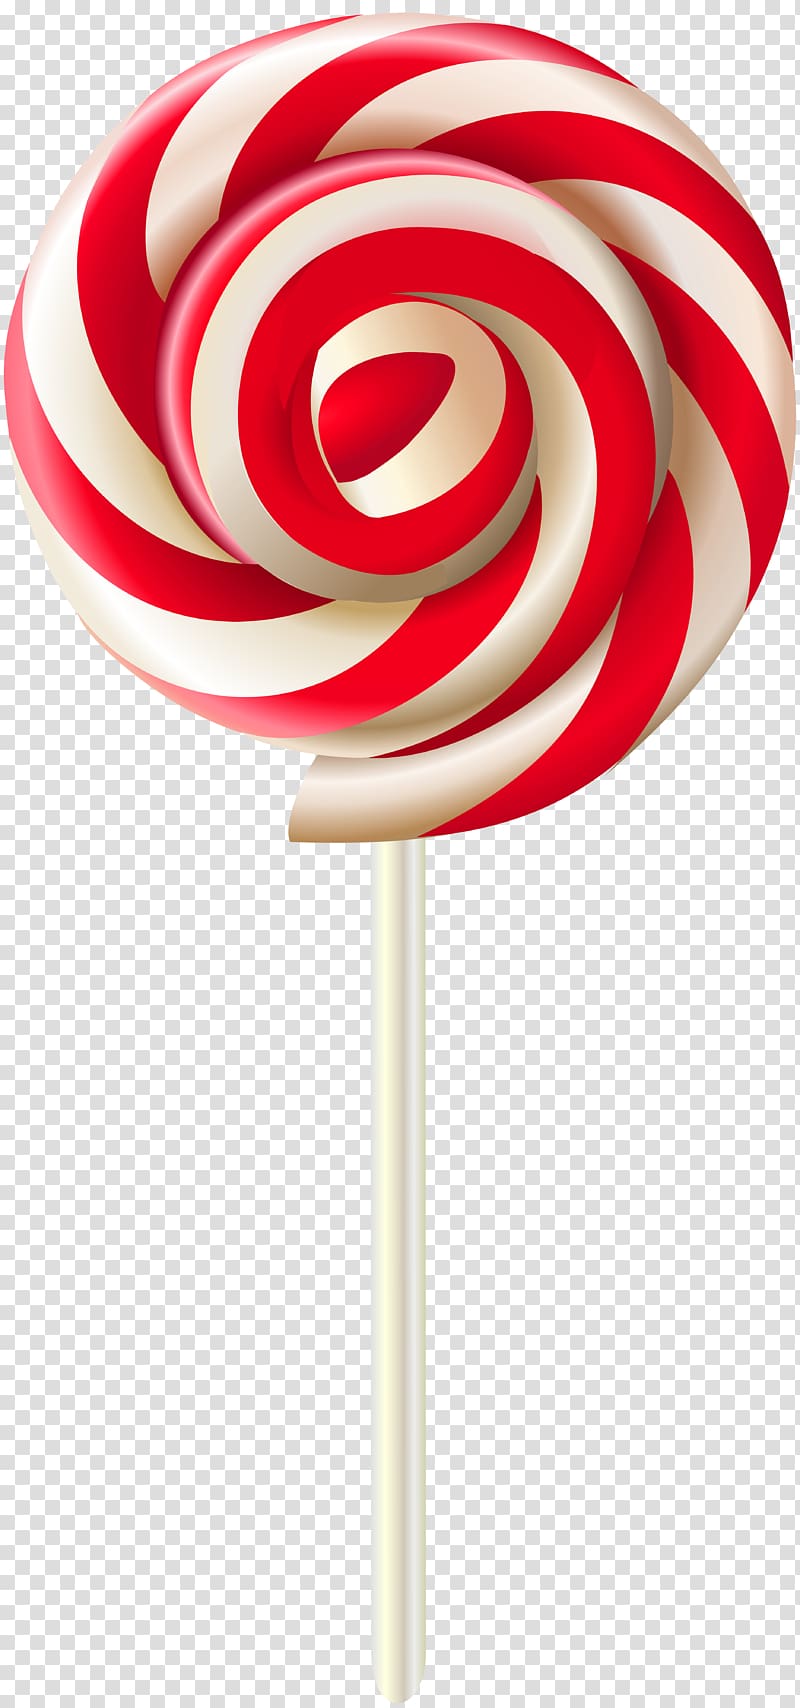 red and white spiral lollipop, Font Design Product, Red Swirl Lollipop transparent background PNG clipart